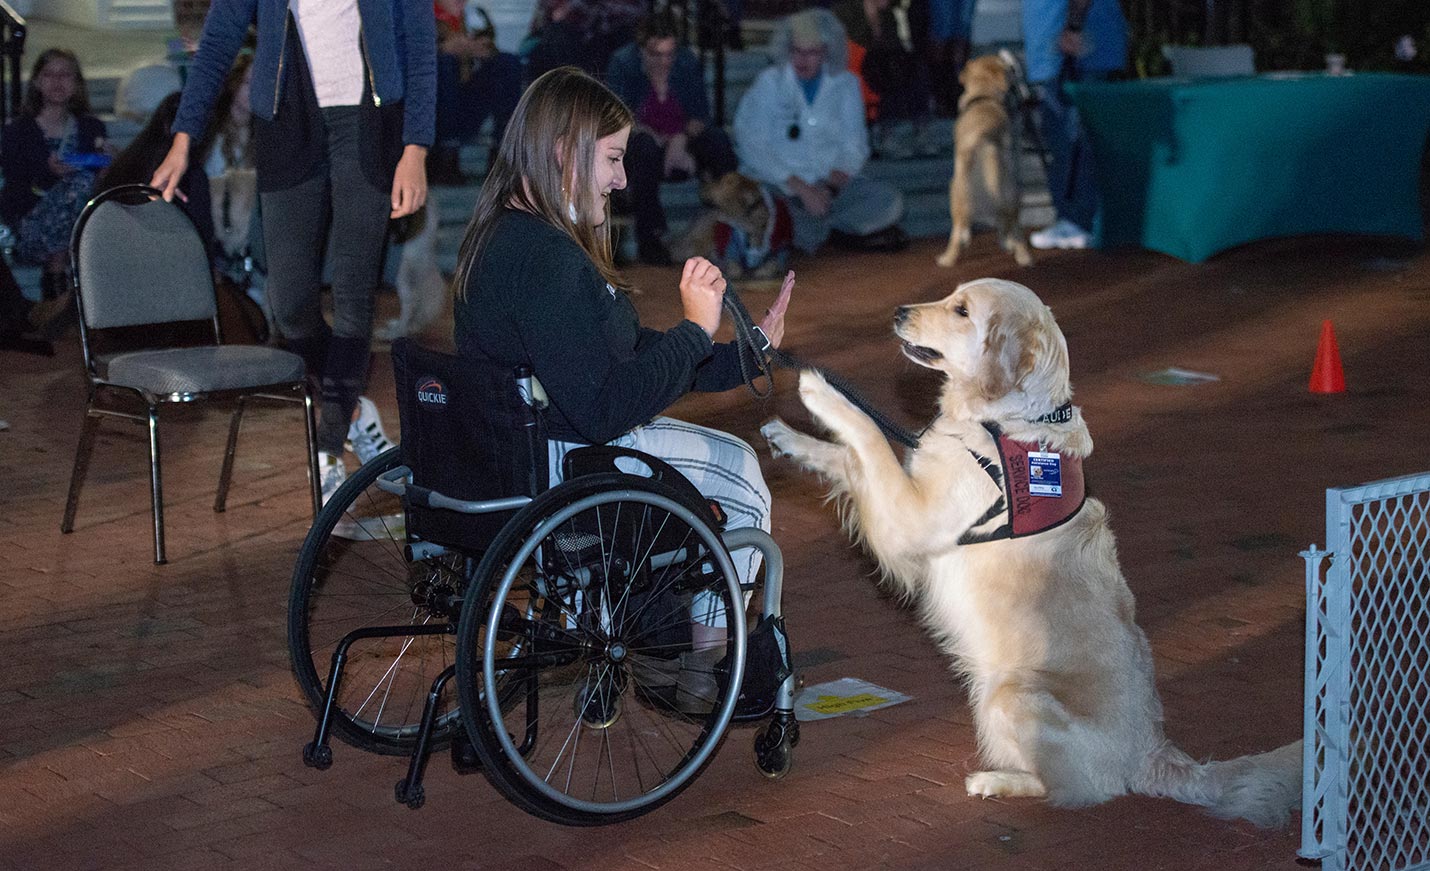 A golden retriever with a service dog vest high fives a student in a wheelchair.